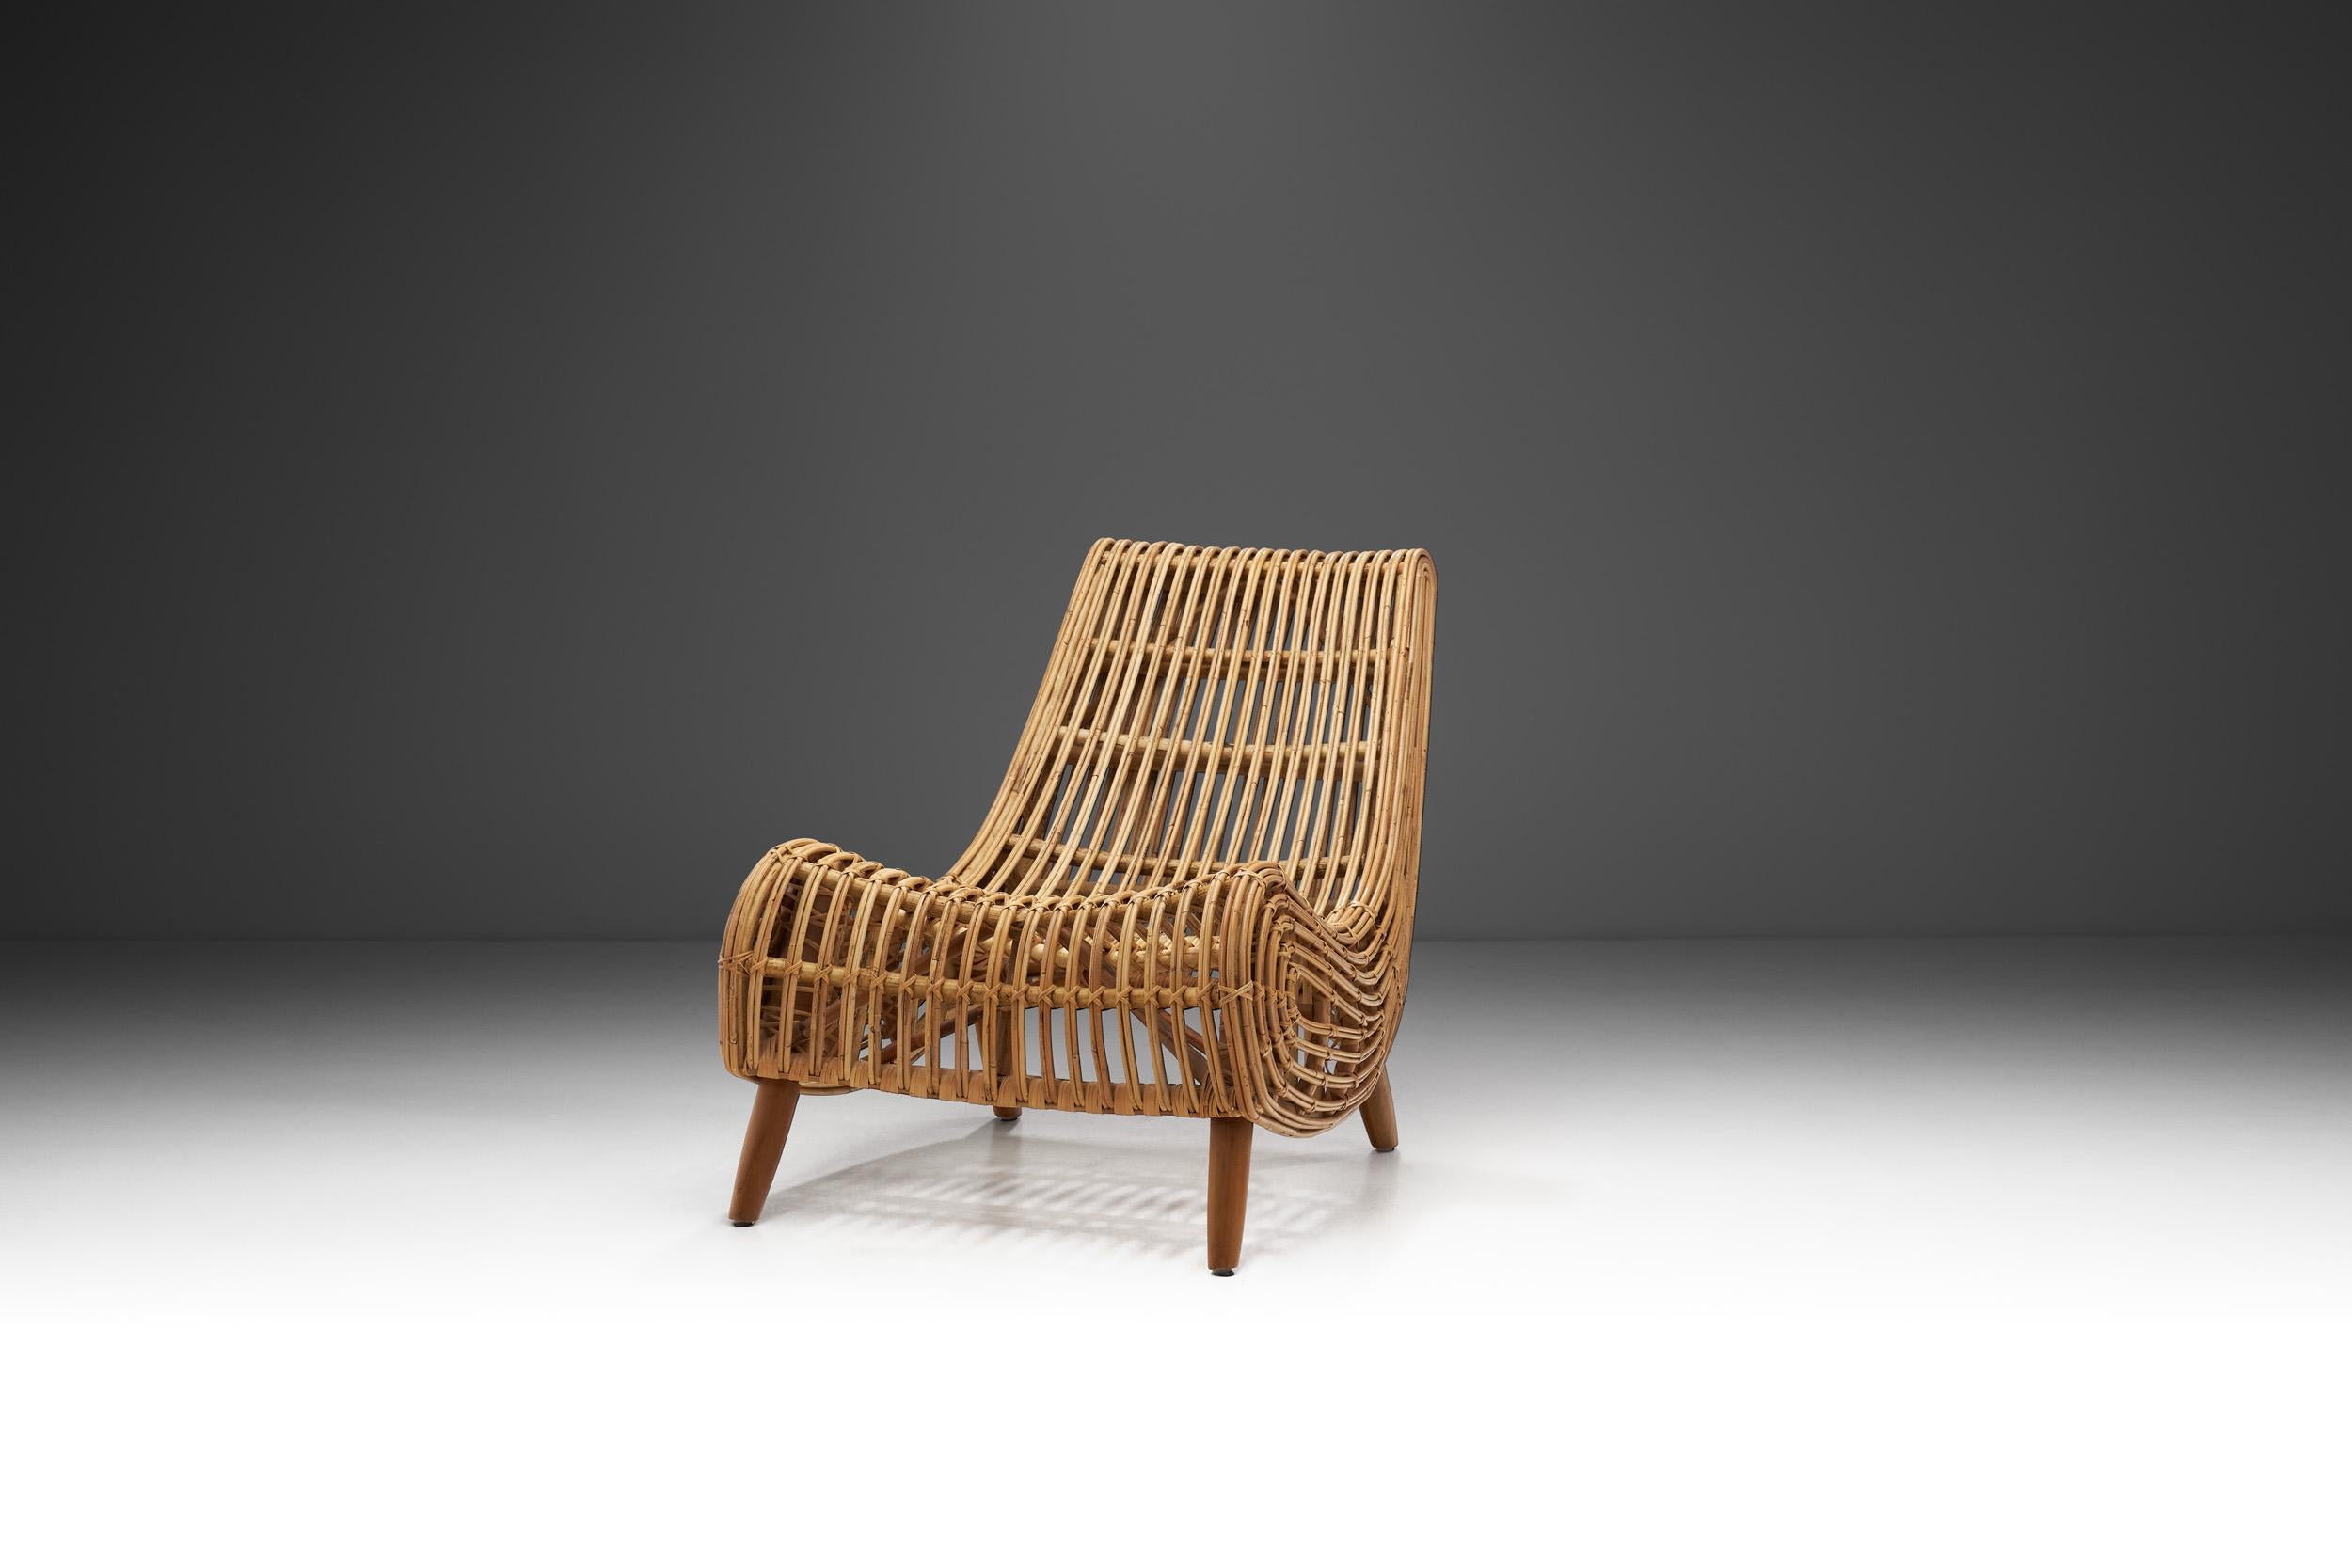 If there’s one interior trend lasting over decades, it’s rattan furniture. While it has been a popular choice for outdoor furniture over the years, rattan chairs found their way indoors. As this exceptionally rare Piero Palange and Werther Toffoloni